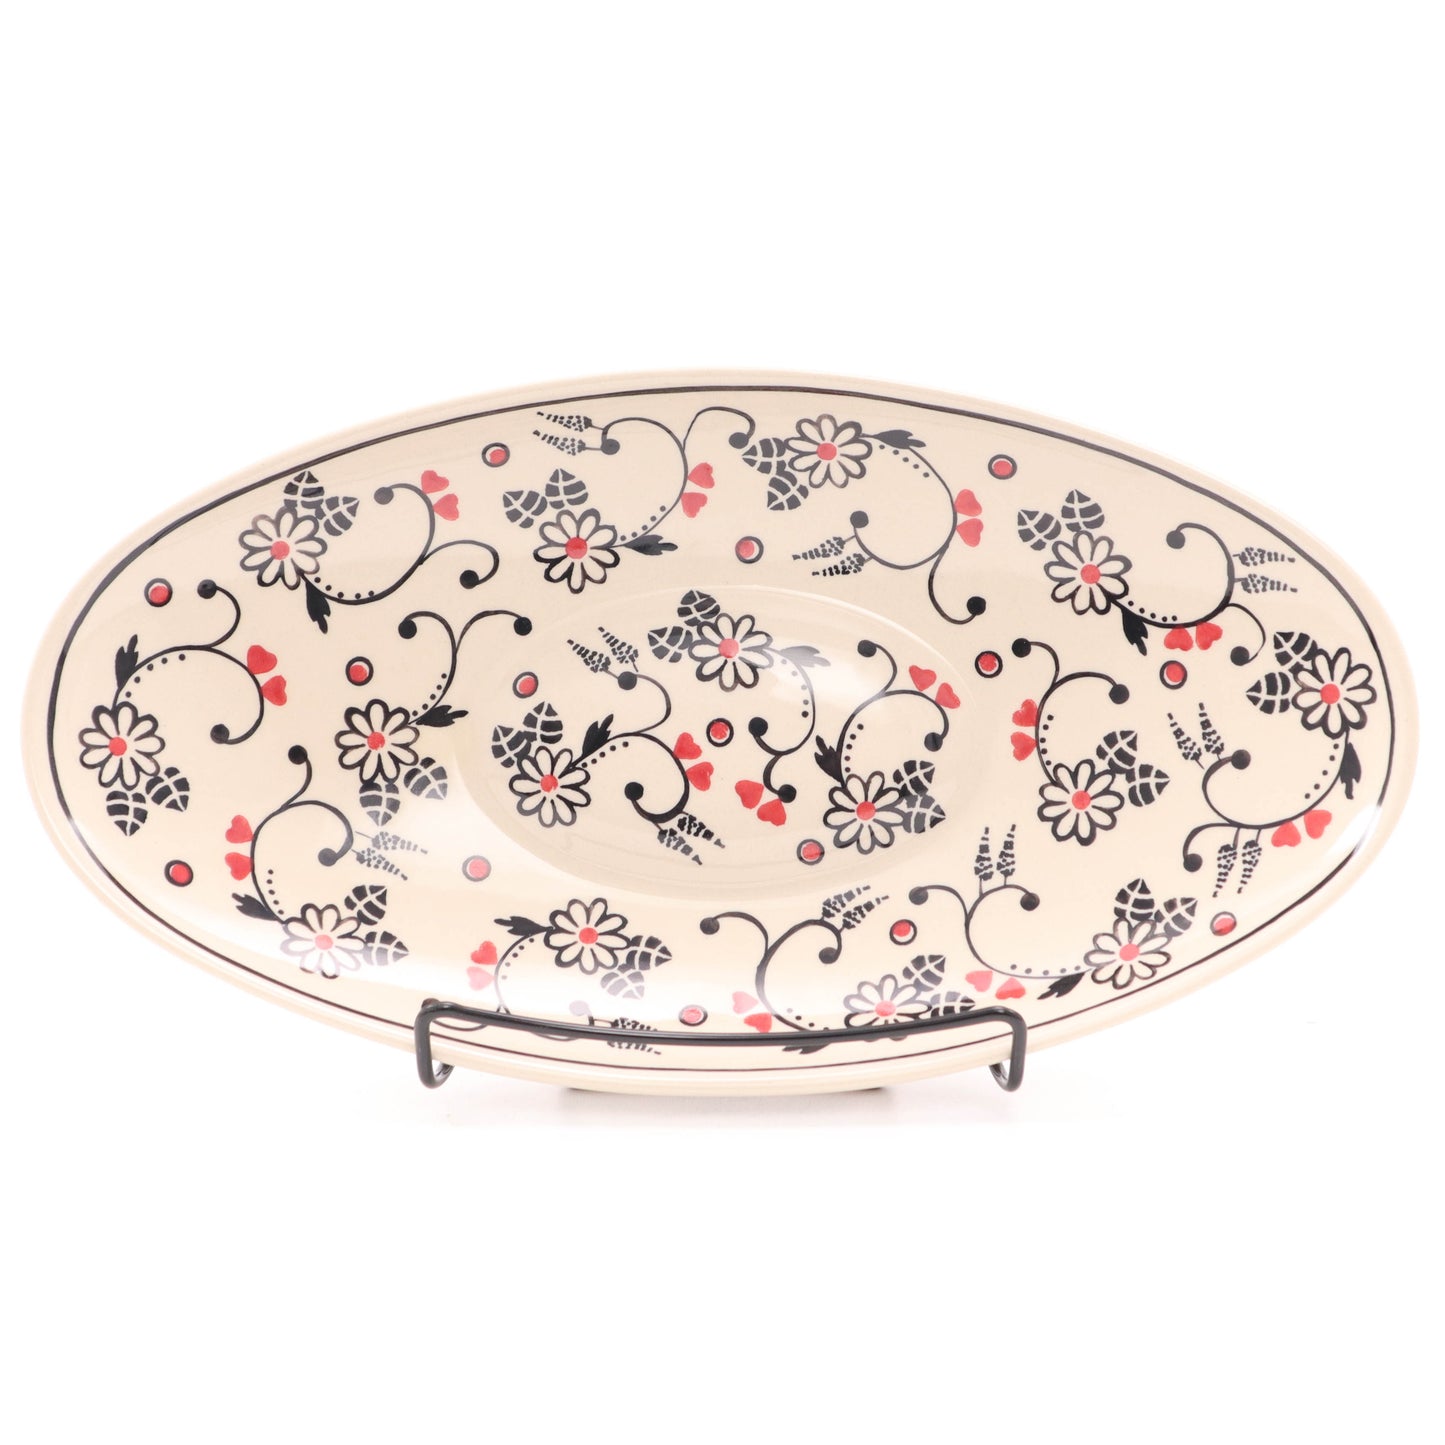 13 X 7" X 2" Oval Serving Dish.  Pattern:  Red Hearts